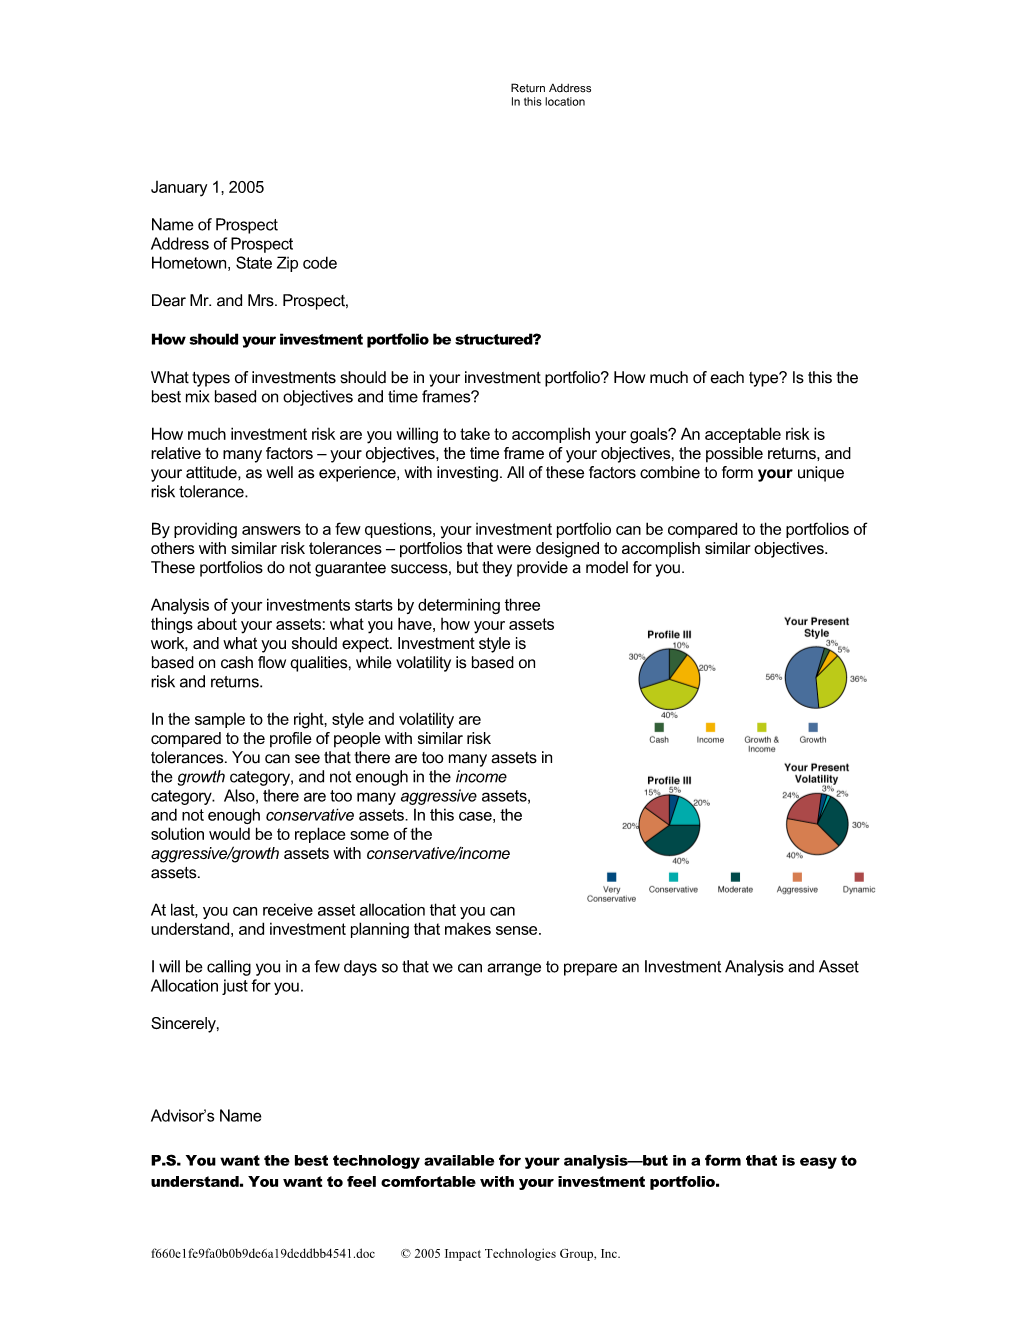 Asset Allocation Only Letter